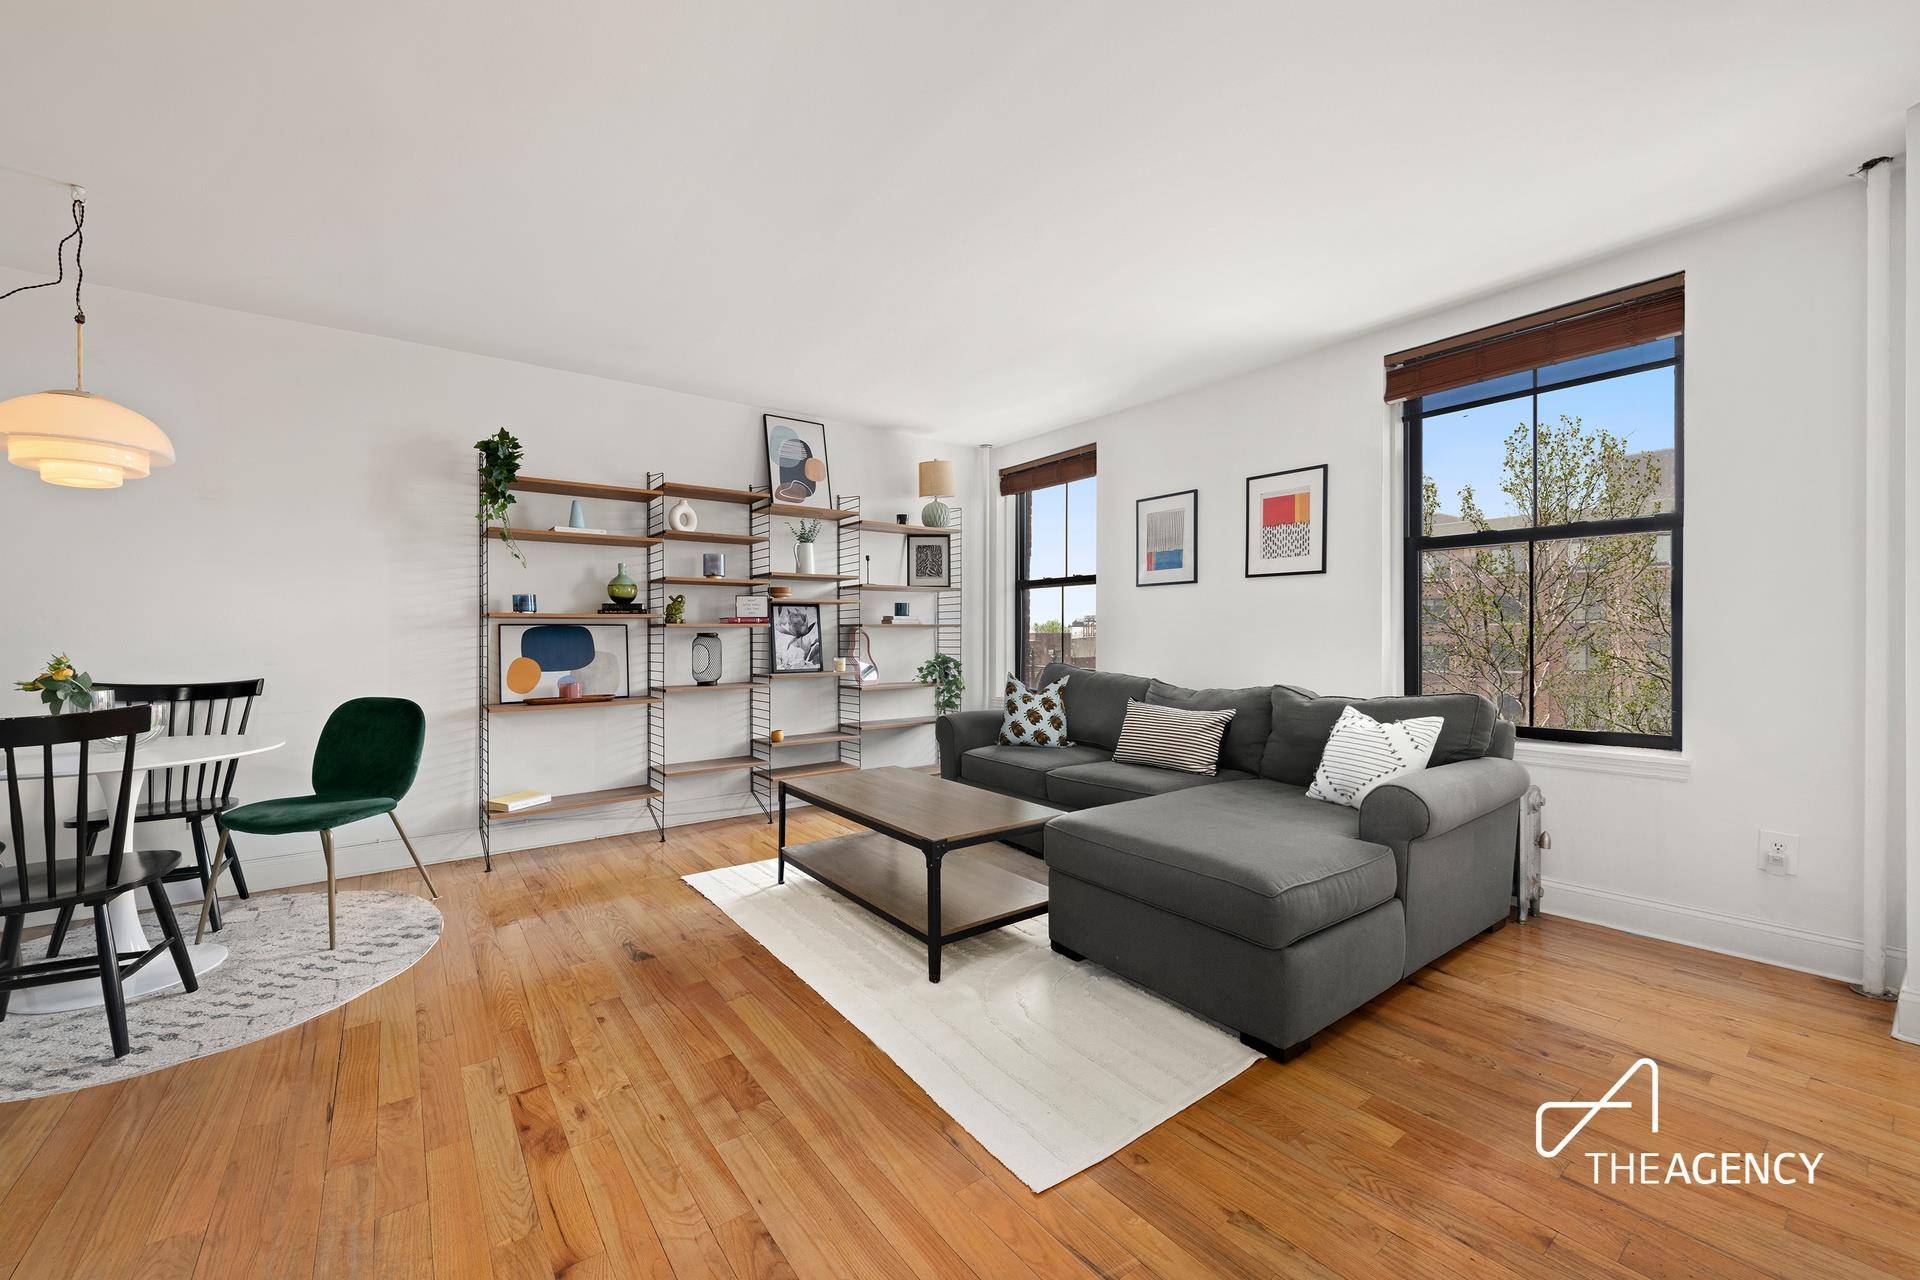 Welcome home to 417 Hicks Street Unit 5D, the Cobble Hill one bedroom condo you've been looking for.